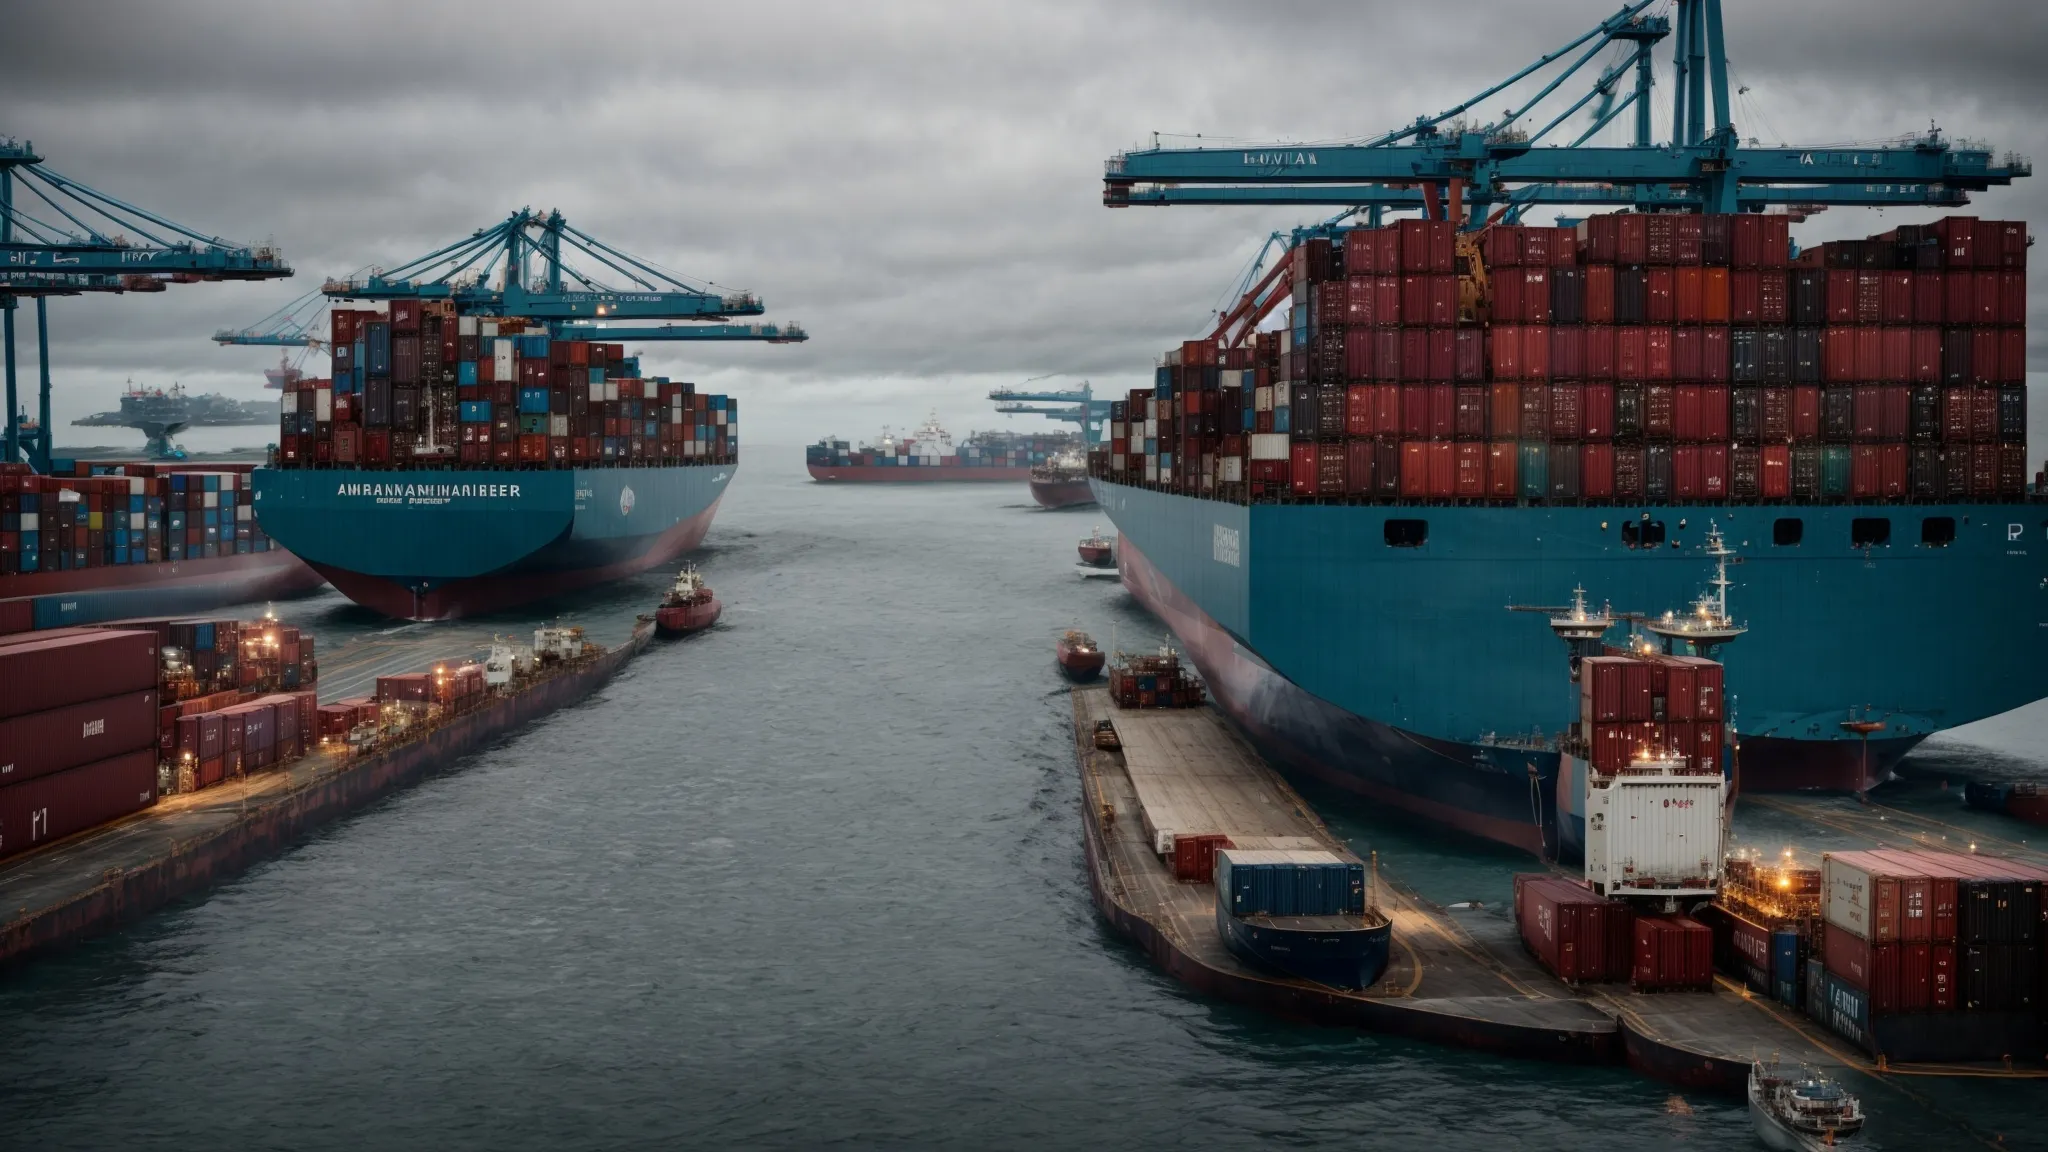 container ships lie anchored in a congested sea port, with no visible crew or disruption, under a heavy, overcast sky.